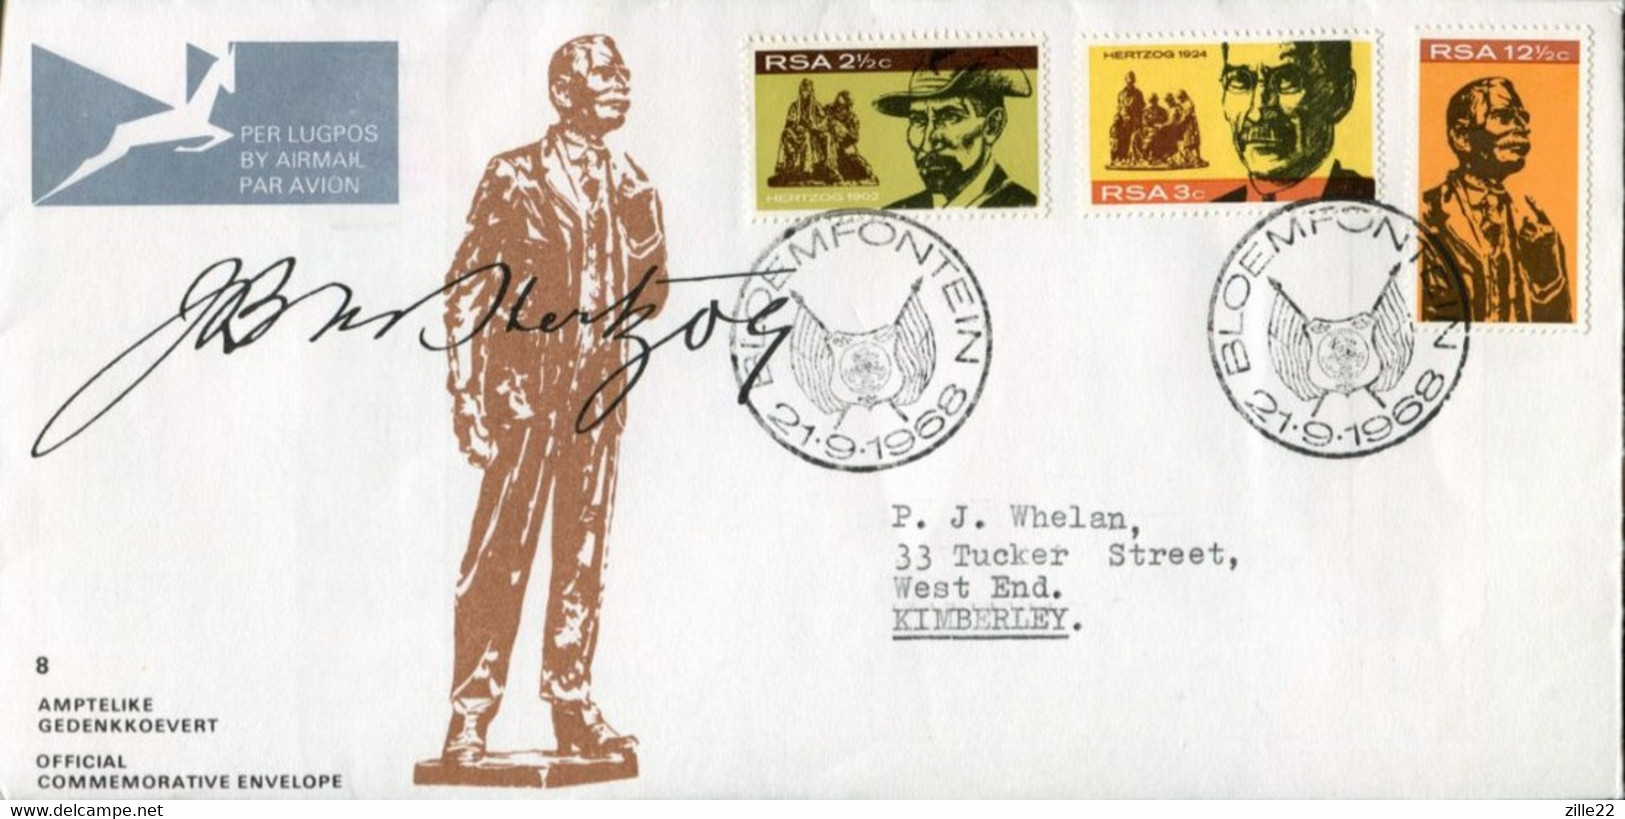 RSA - Republik Südafrika - FDC Addressed Or Special Cover Or Card - Mi# 375-7 - Civil War General Monument - Lettres & Documents